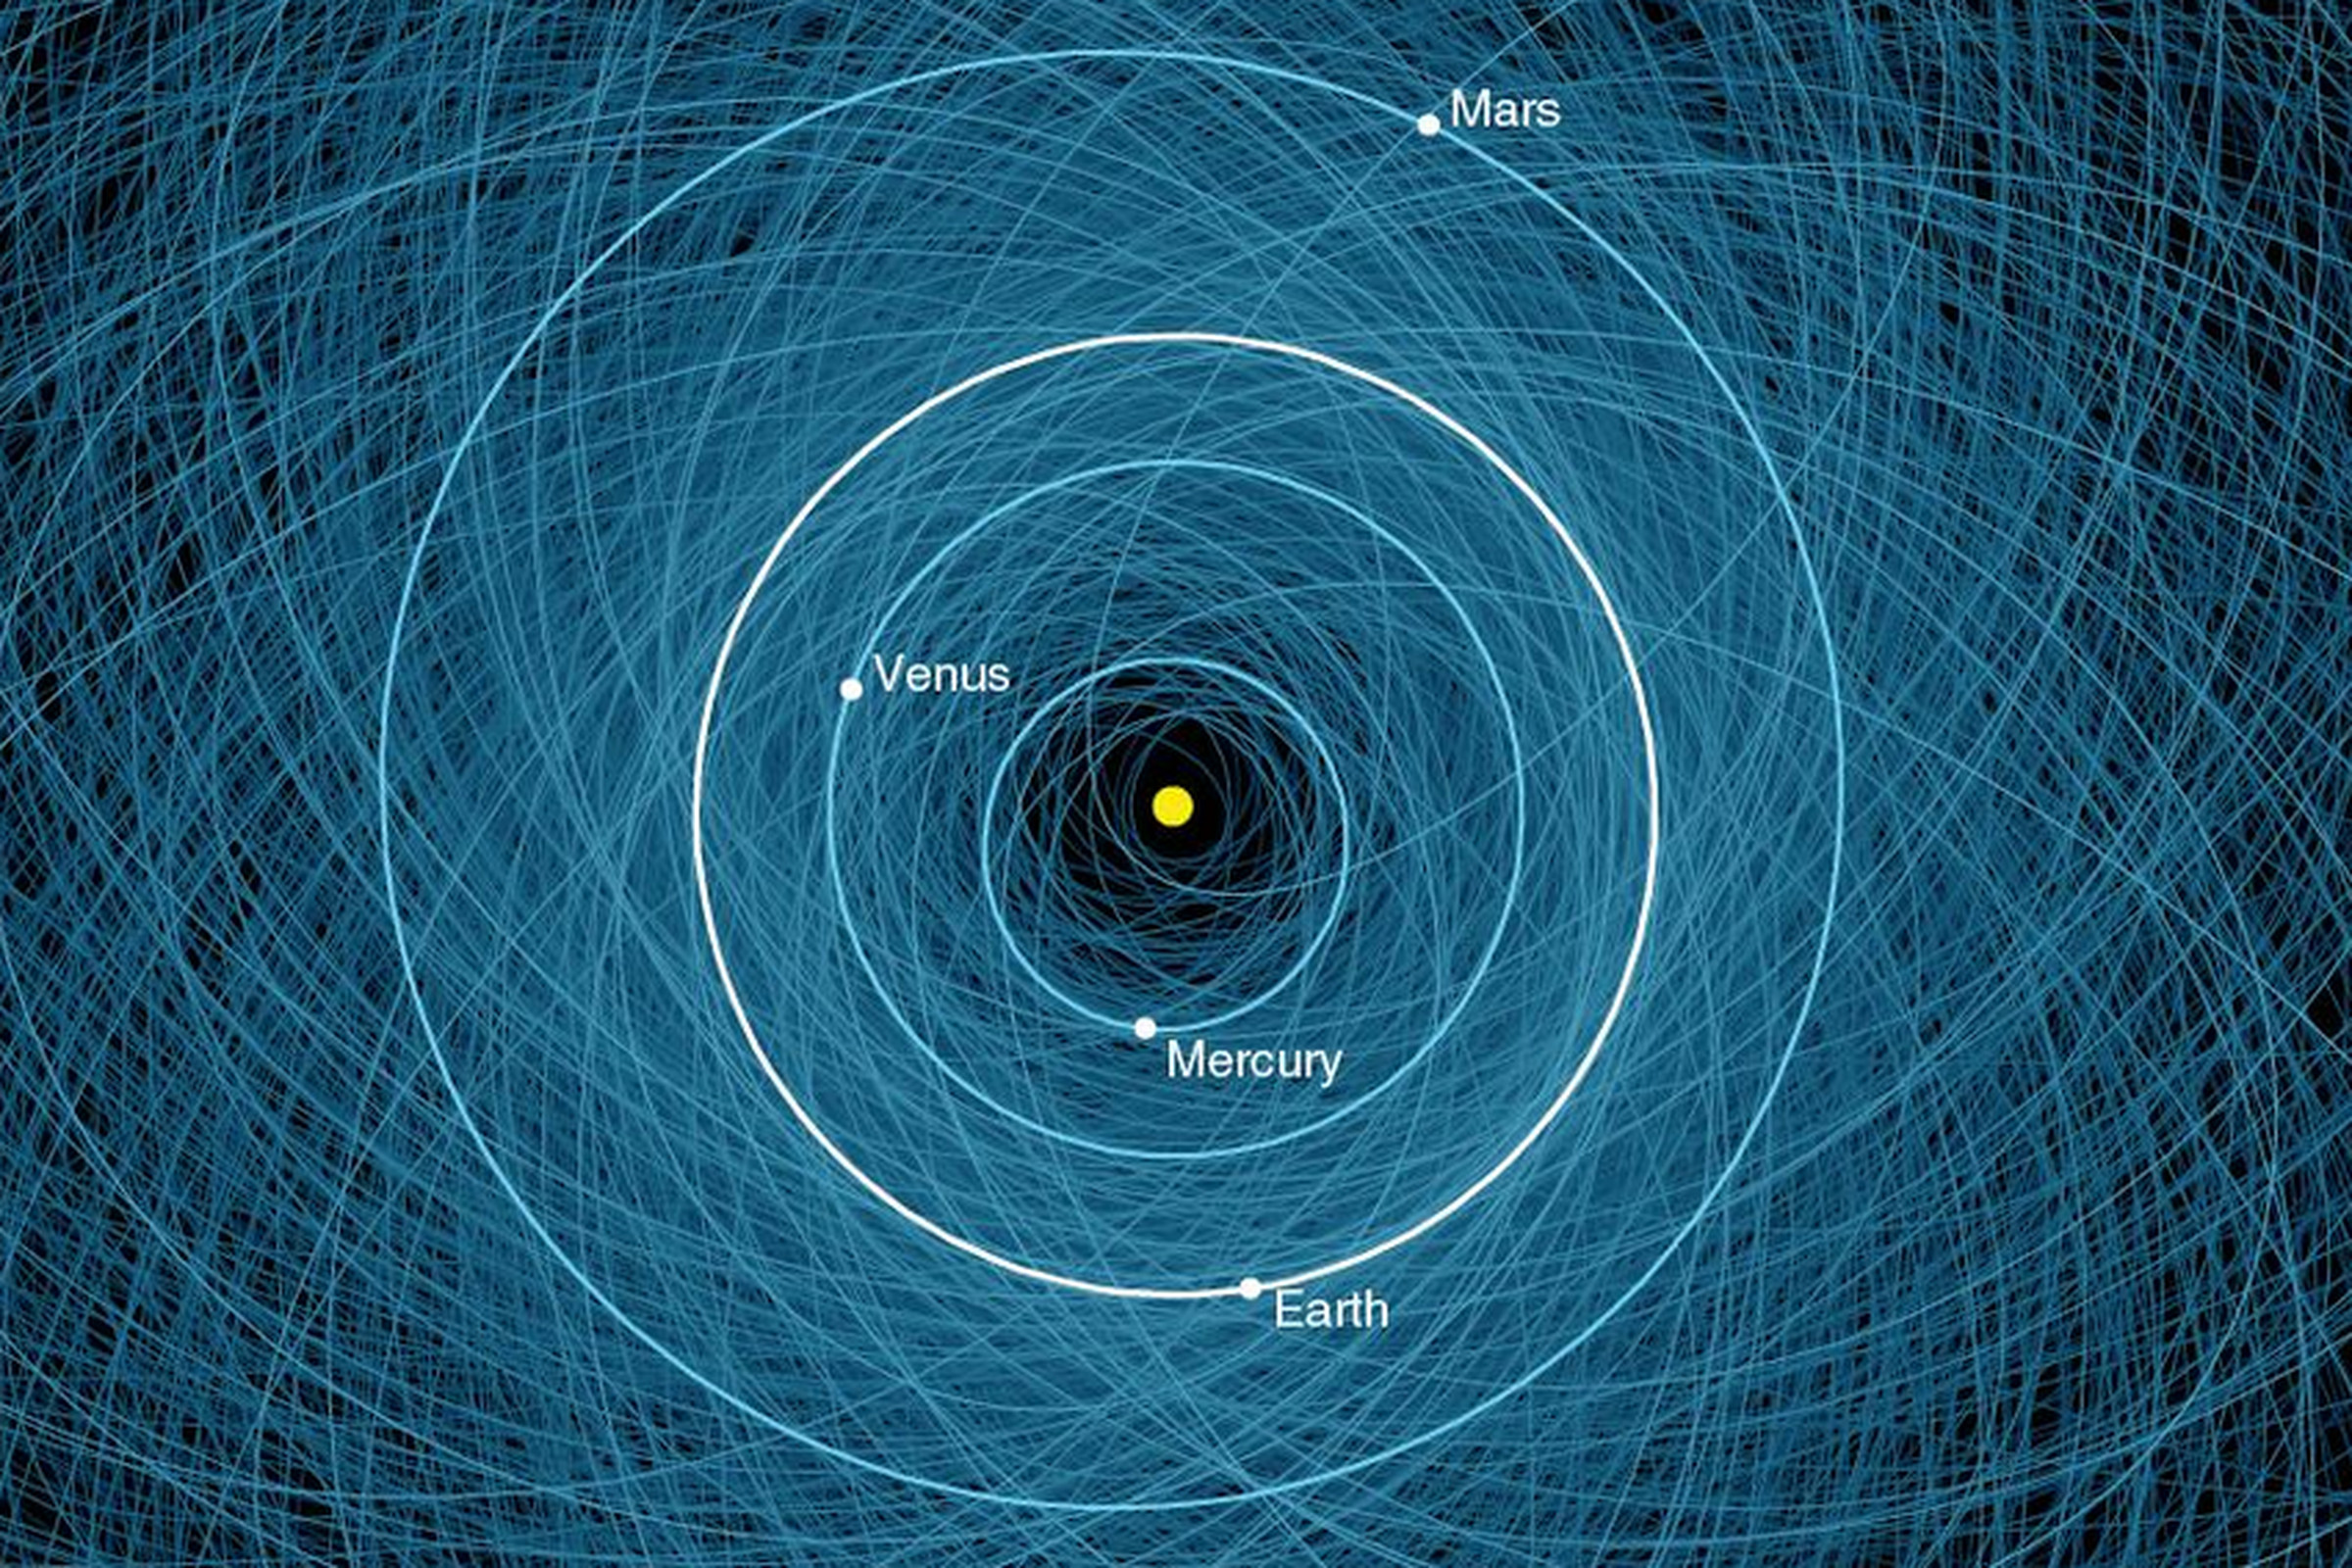 Earth in the potential path of asteroids via NASA JPL Photojournal